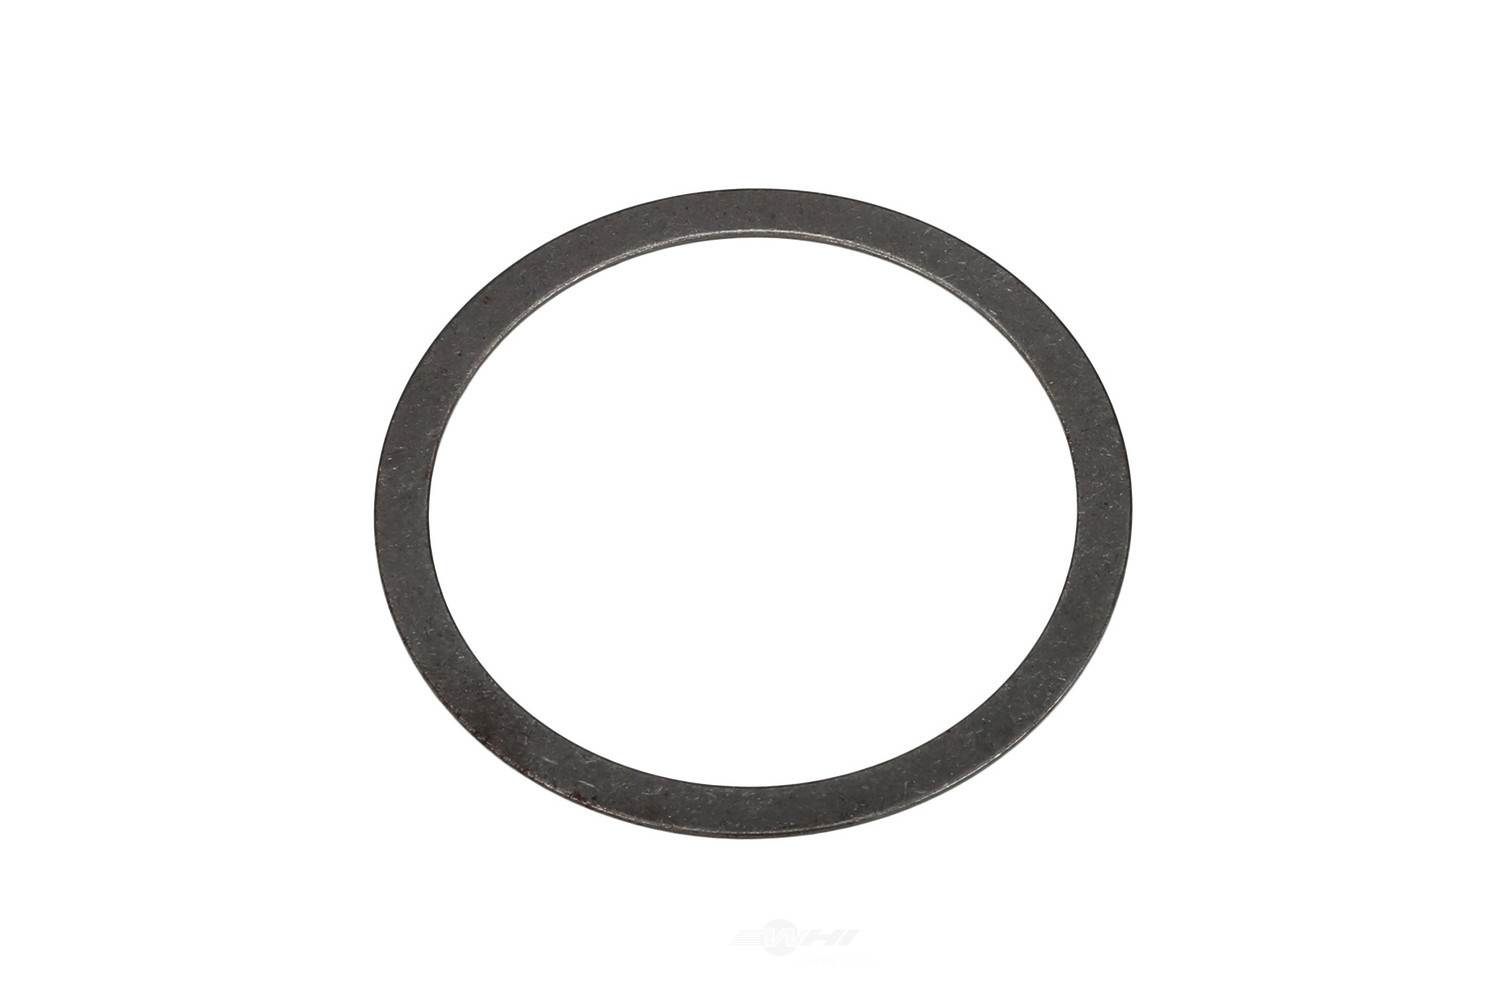 GM GENUINE PARTS - Differential Pinion Bearing Washer - GMP 24234089